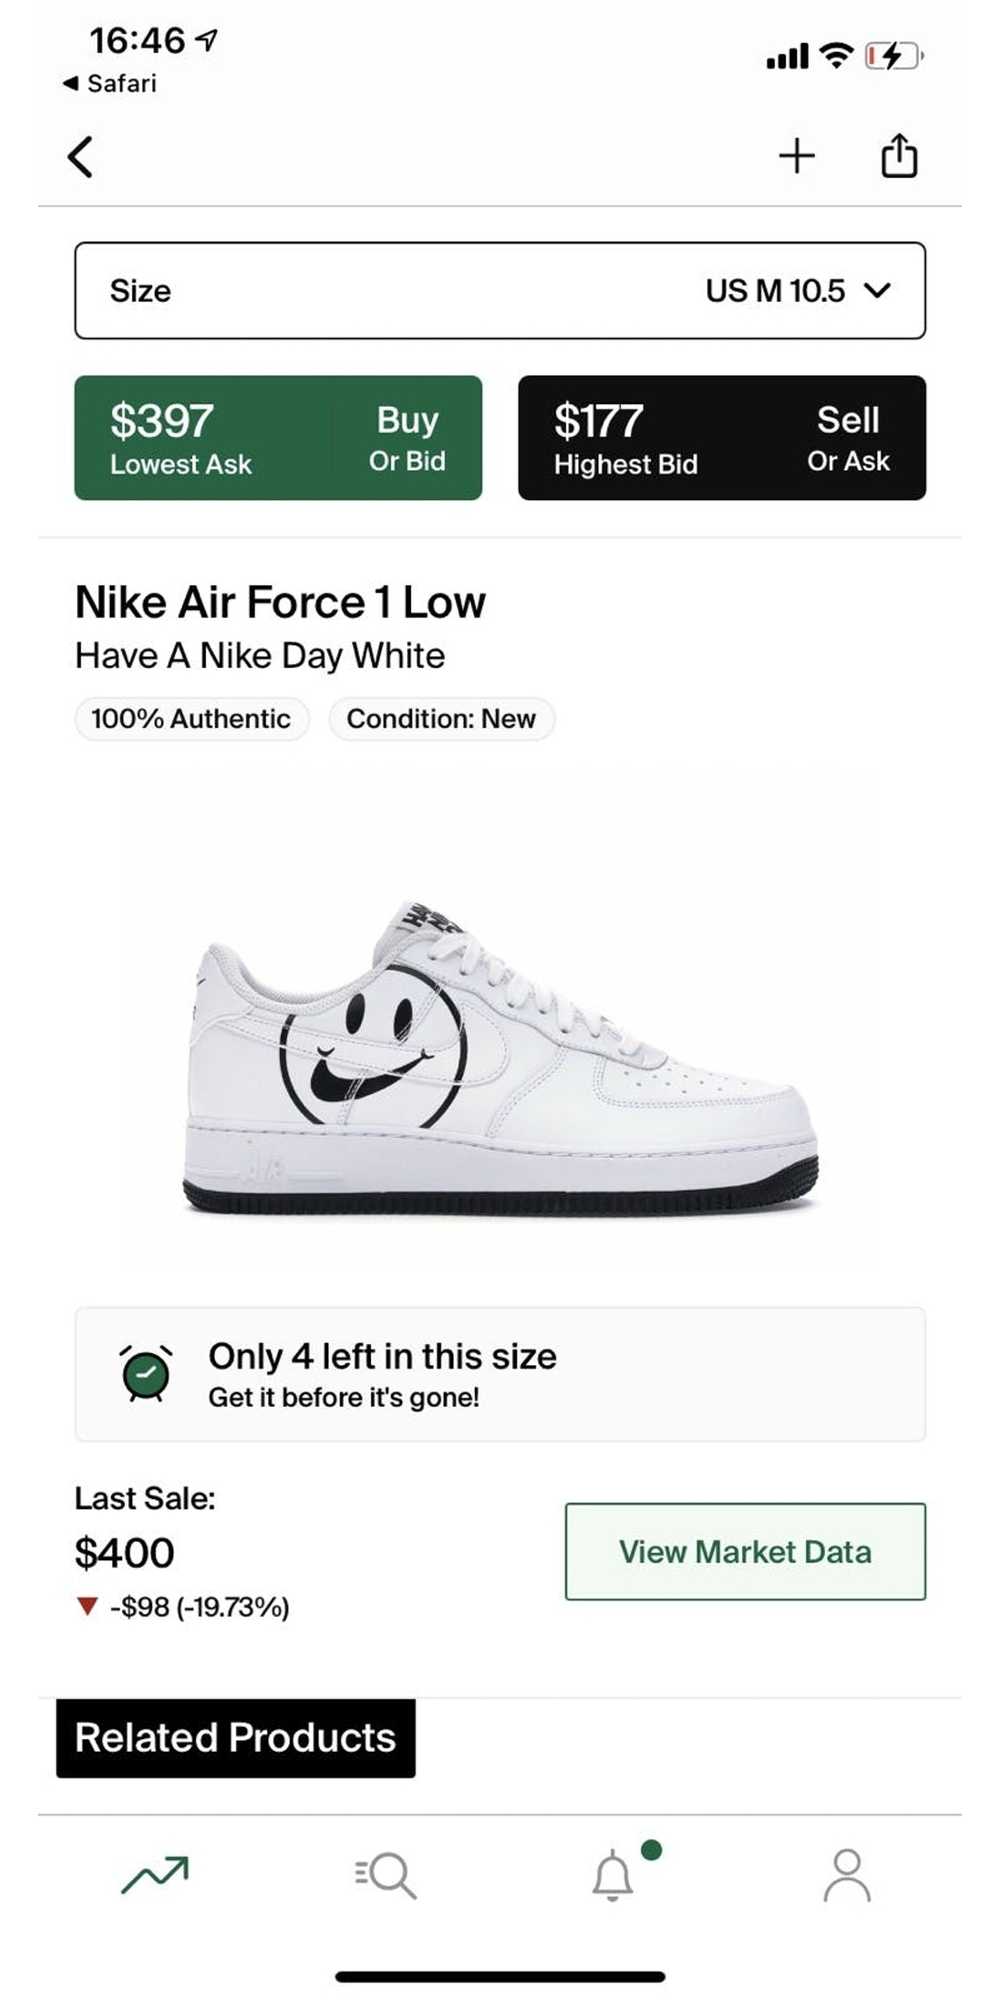 Nike Air Force 1 Low Have a Nike Day - White 2019 - image 2